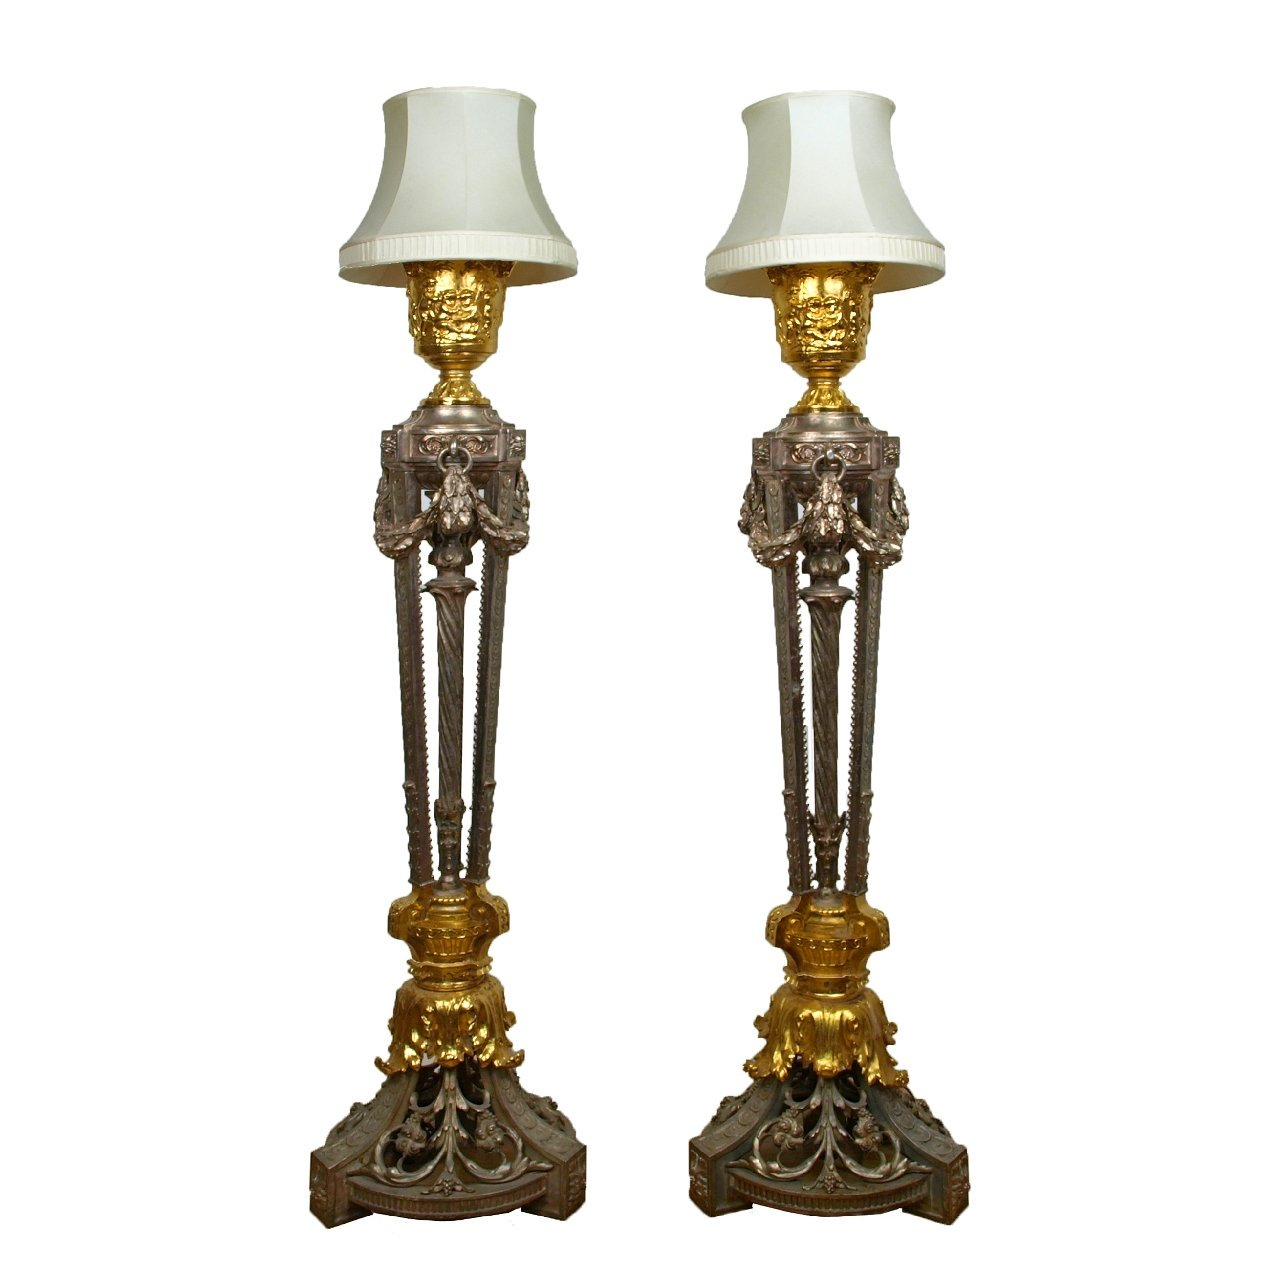 Pair Of Silvered And Gilt Cast Iron Antique Floor Lamps intended for dimensions 1280 X 1280